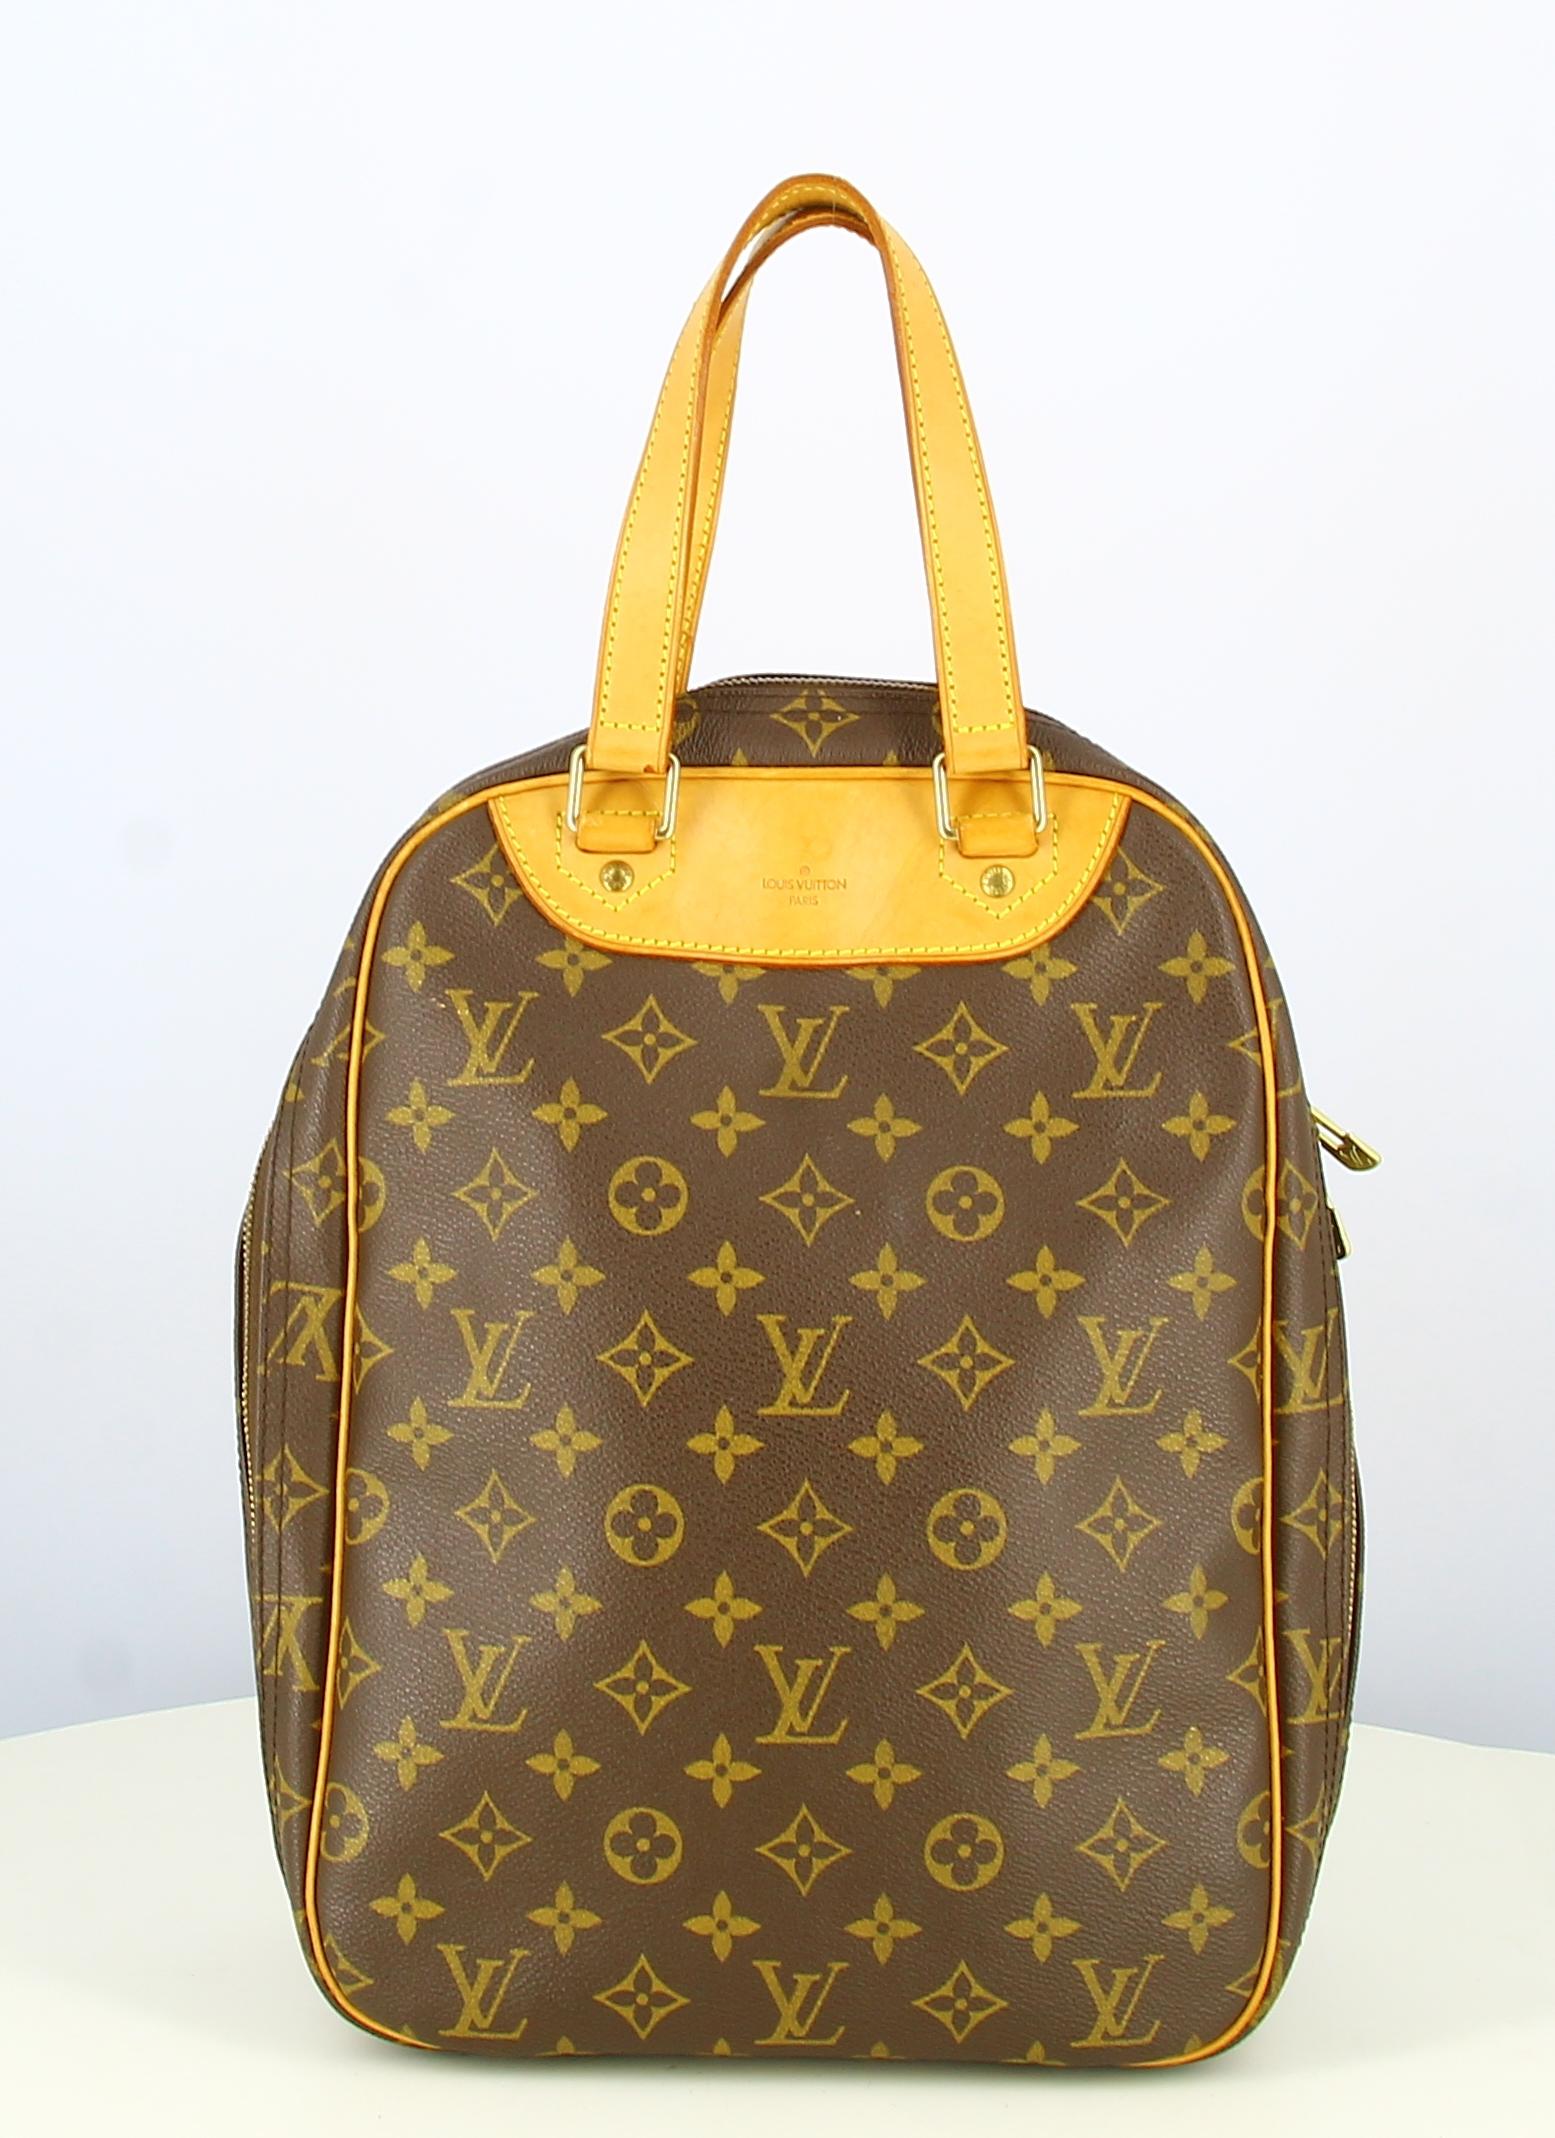 1997 Louis Vuitton Handbag Randonné Canvas Monogram

- Good condition, some signs of use and wear. 
- Louis Vuitton Bag 
- Monogram canvas
- An easy way to store your shoes or change its use by using it as a bag 
- Interior: Beige canvas plus small